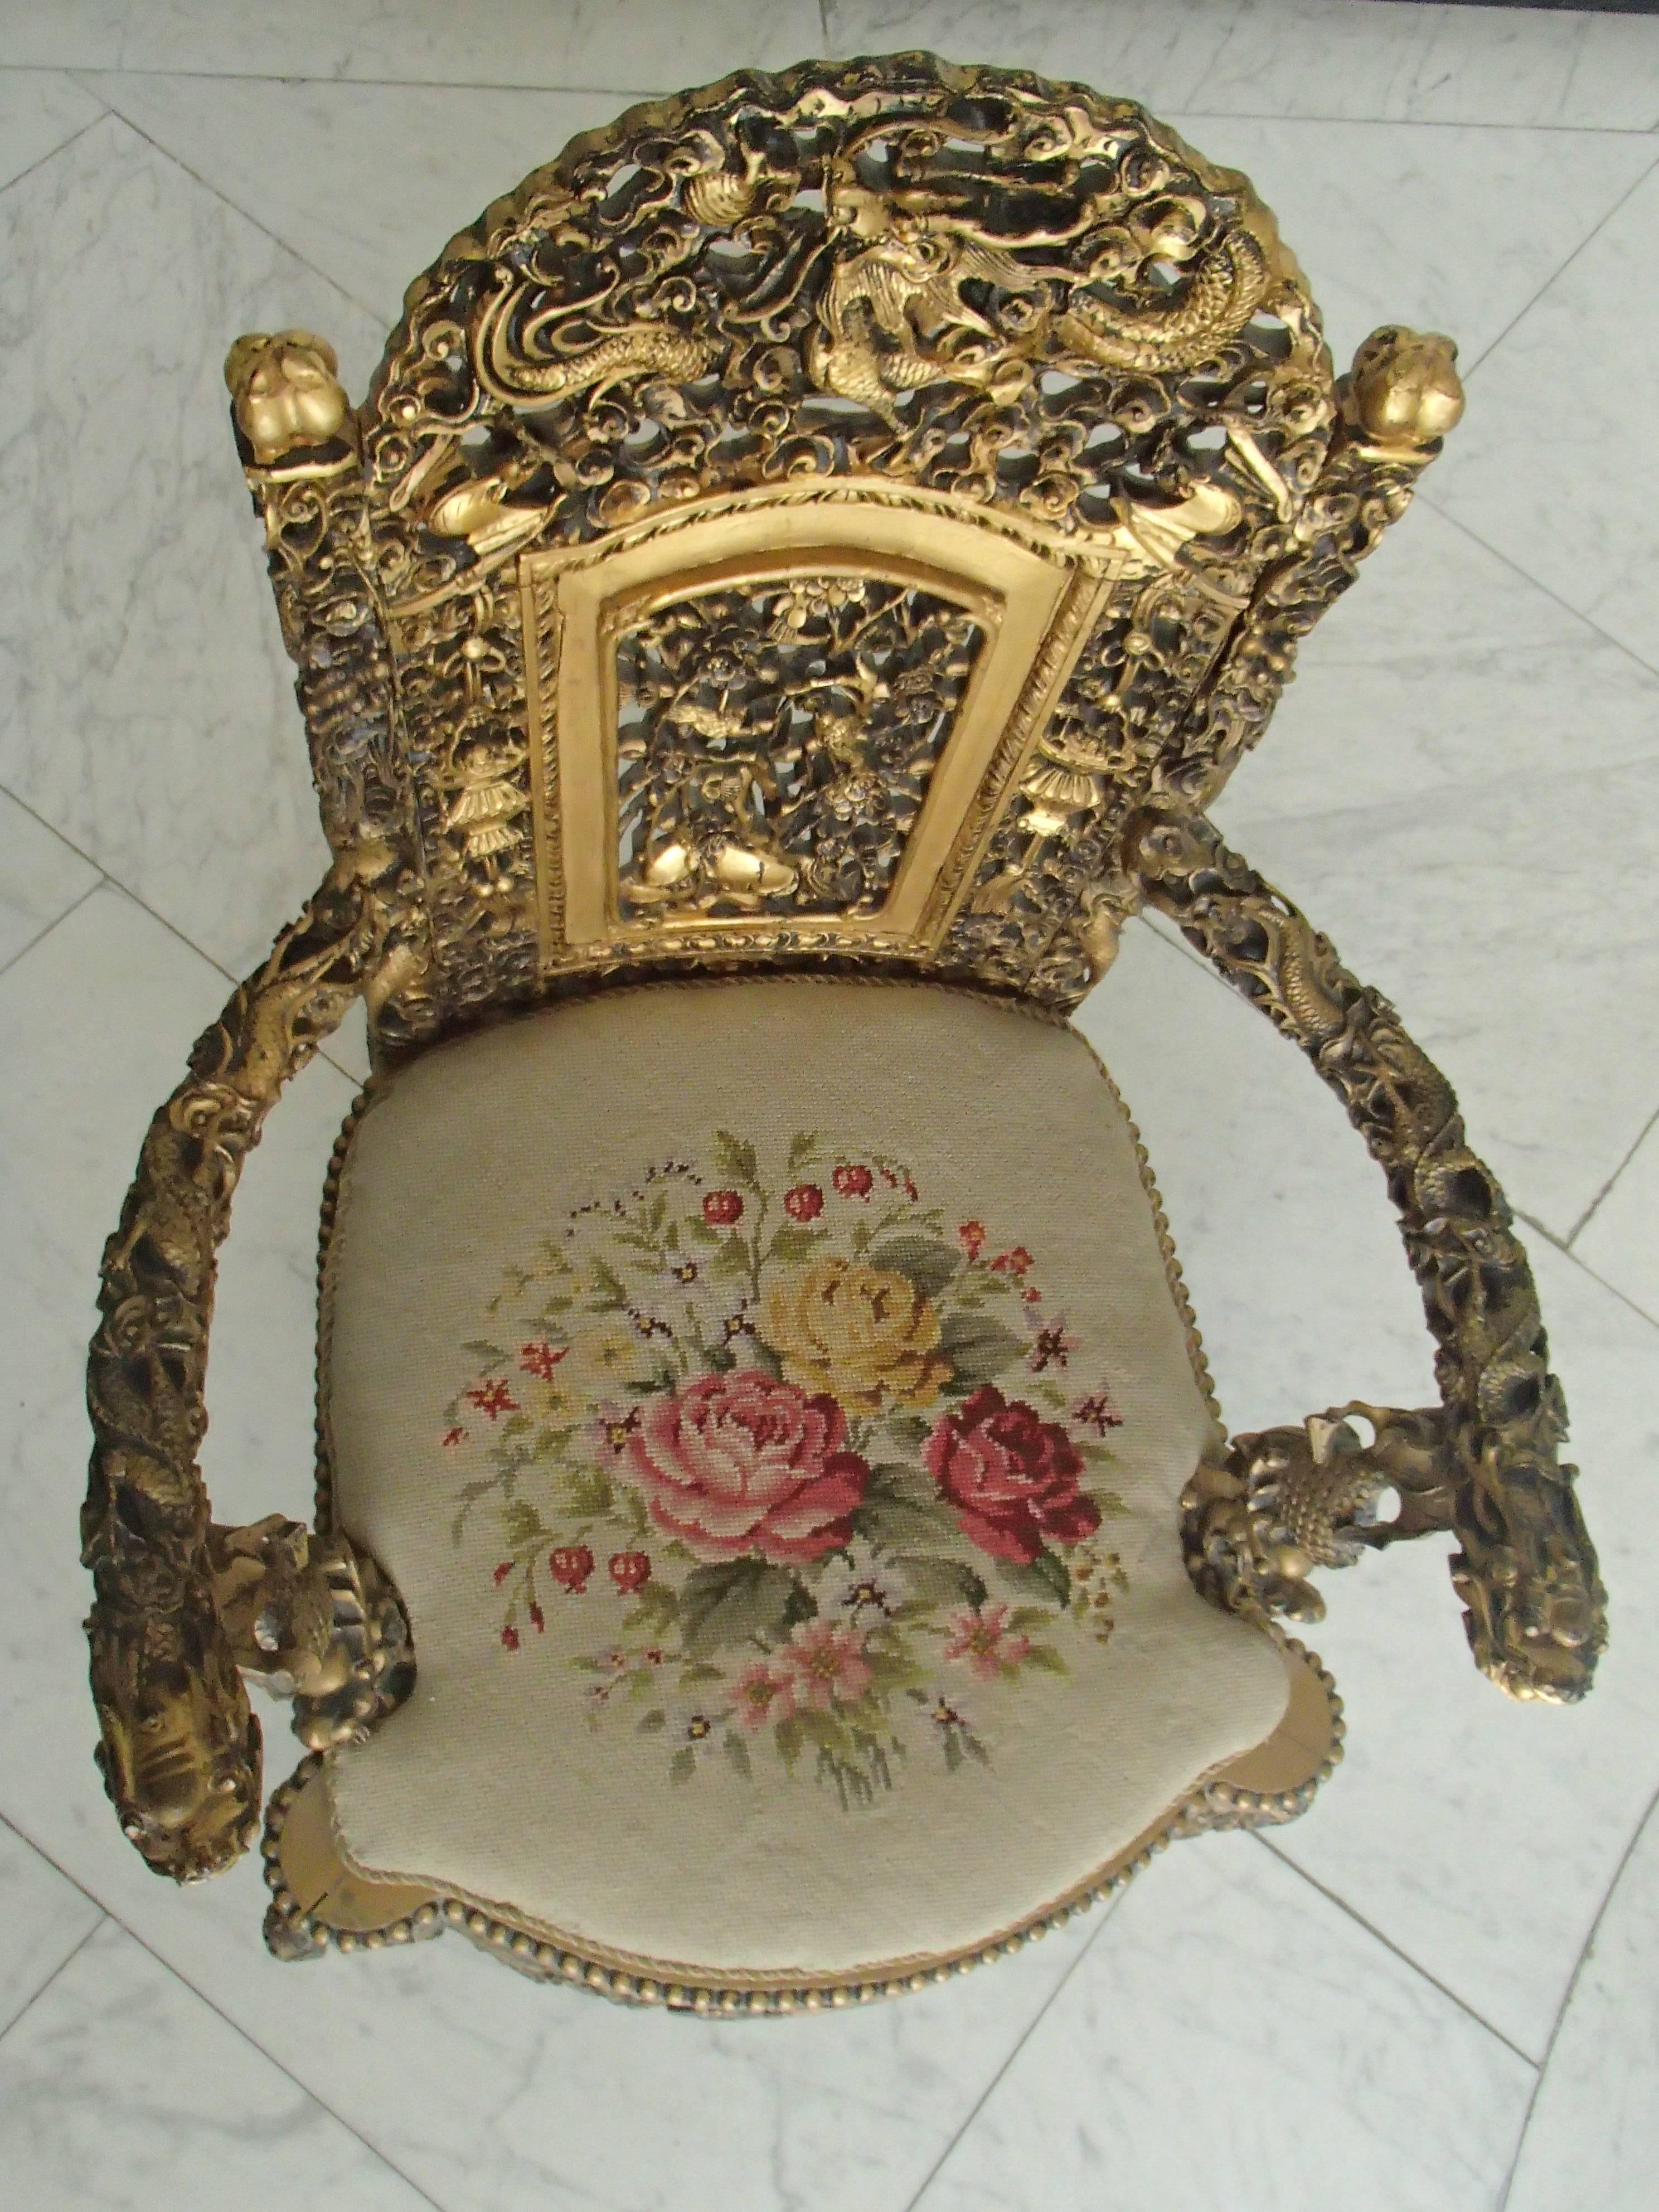 1930 Chinese armchair sculpted and gold-plated with goblin.